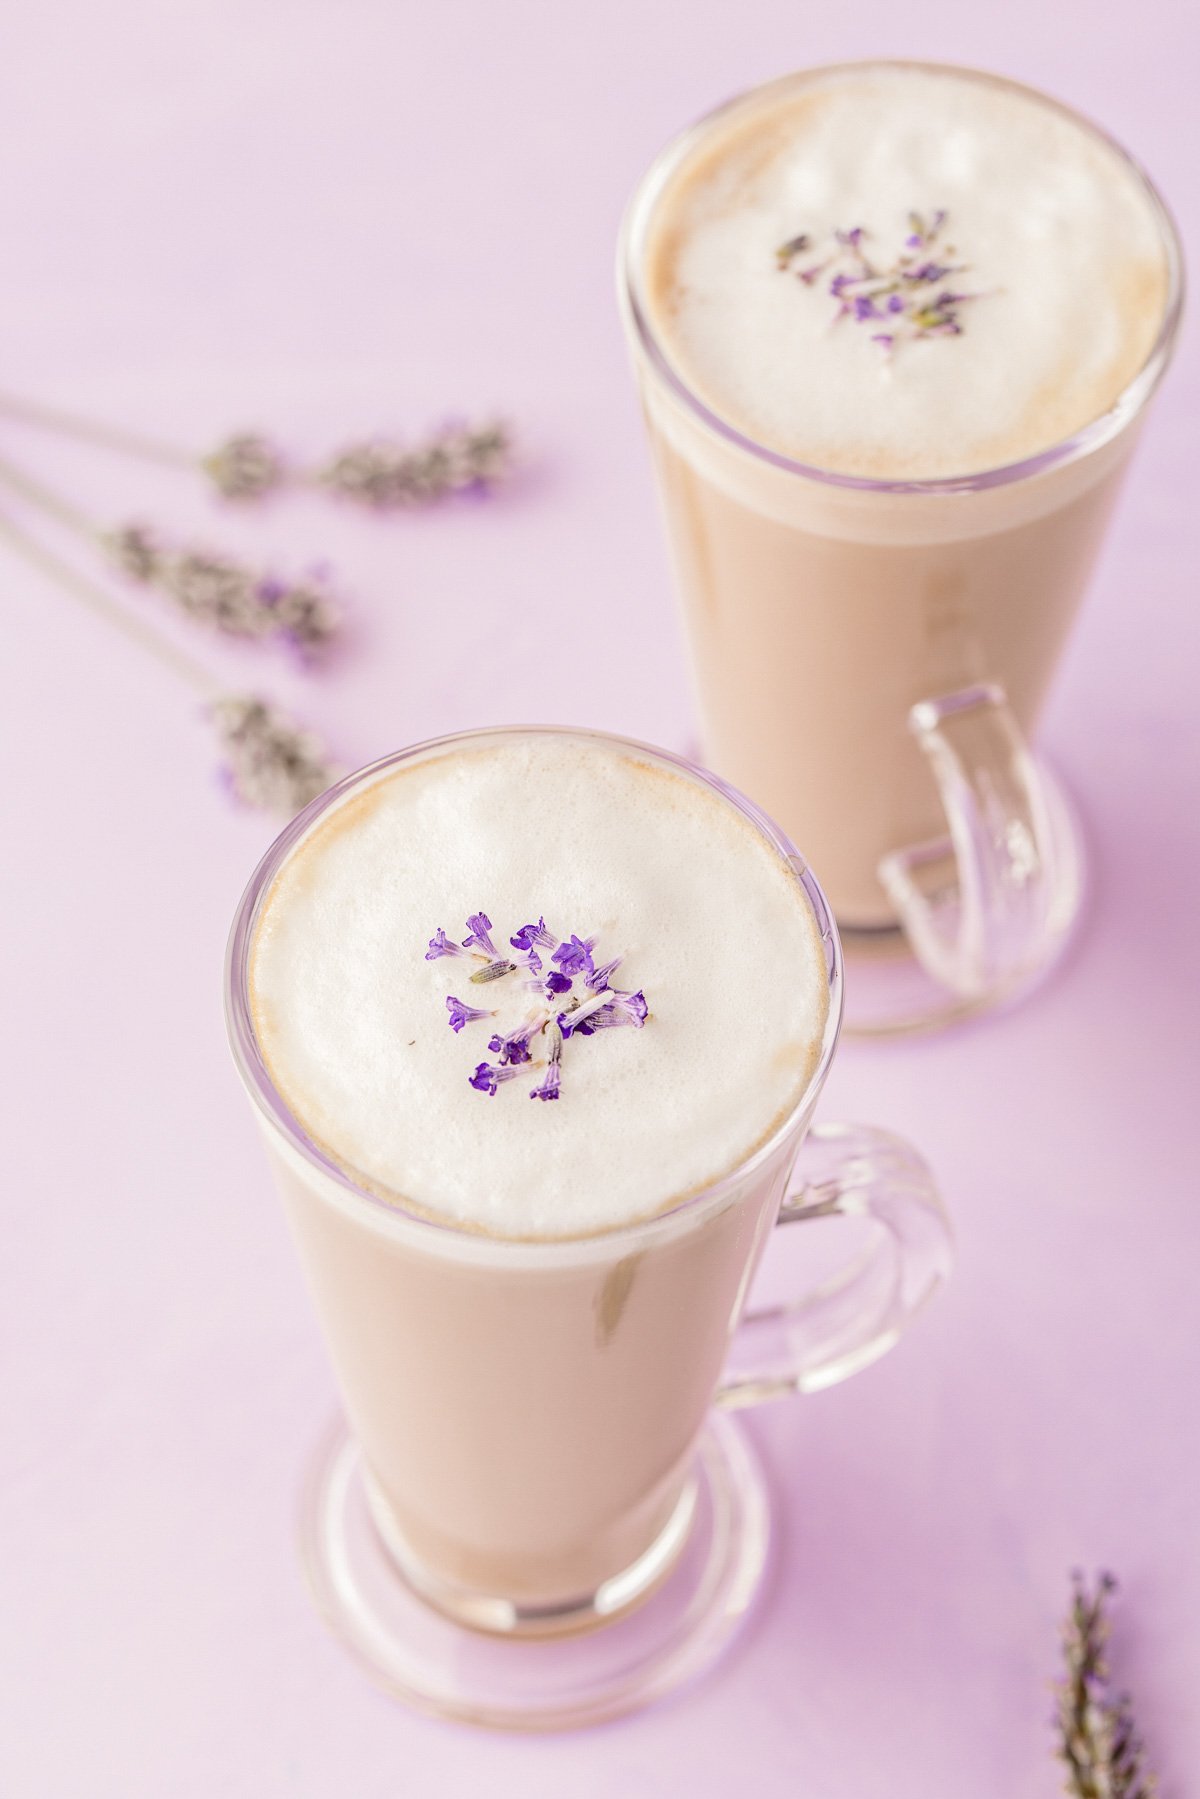 Two lavender lattes in glass mugs on a purple surface.